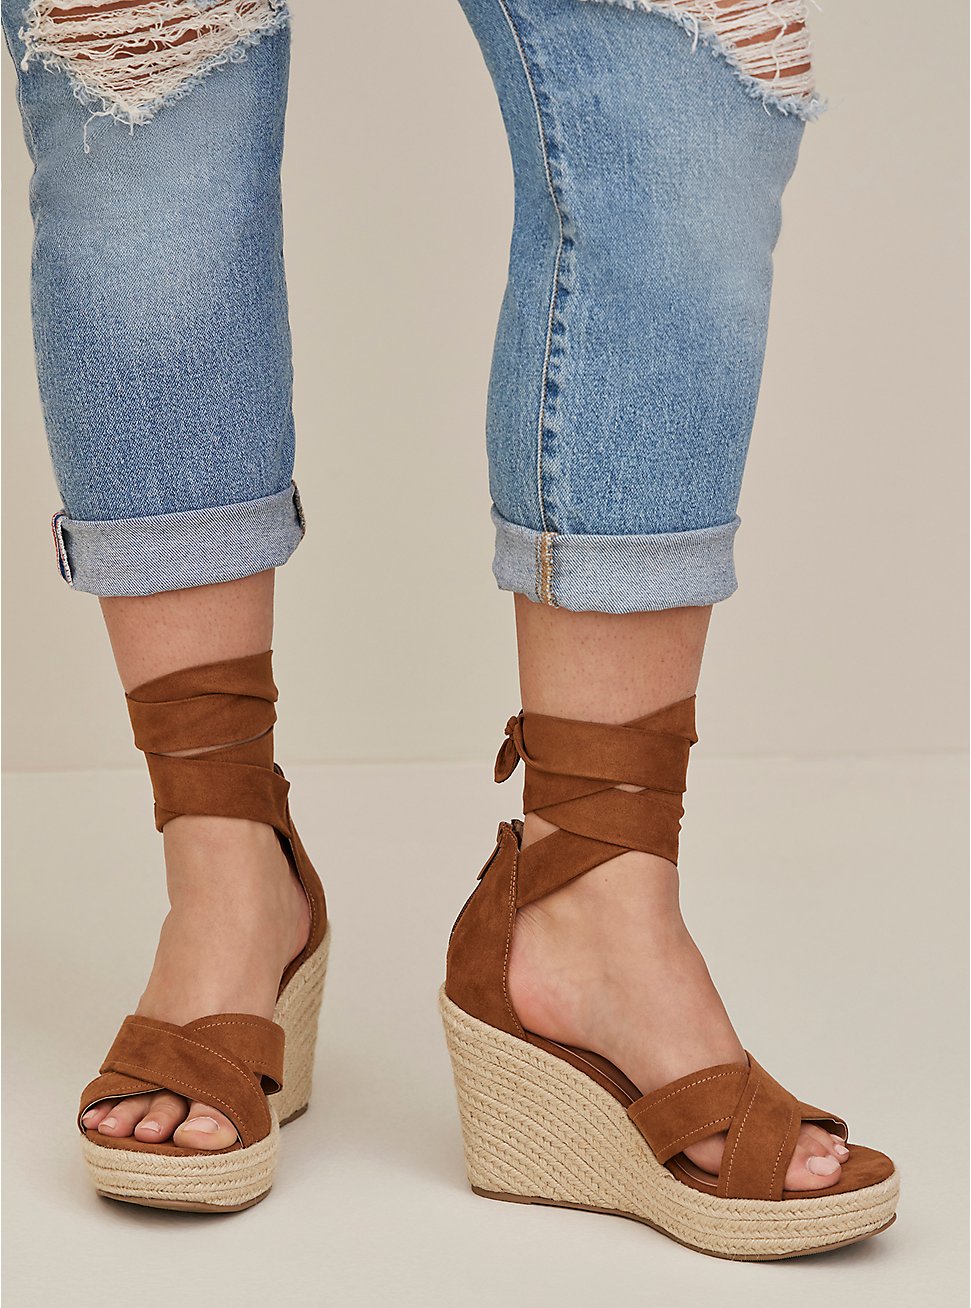 Plus Size Lace-Up Espadrille Wedge - Brown (WW), BROWN, hi-res